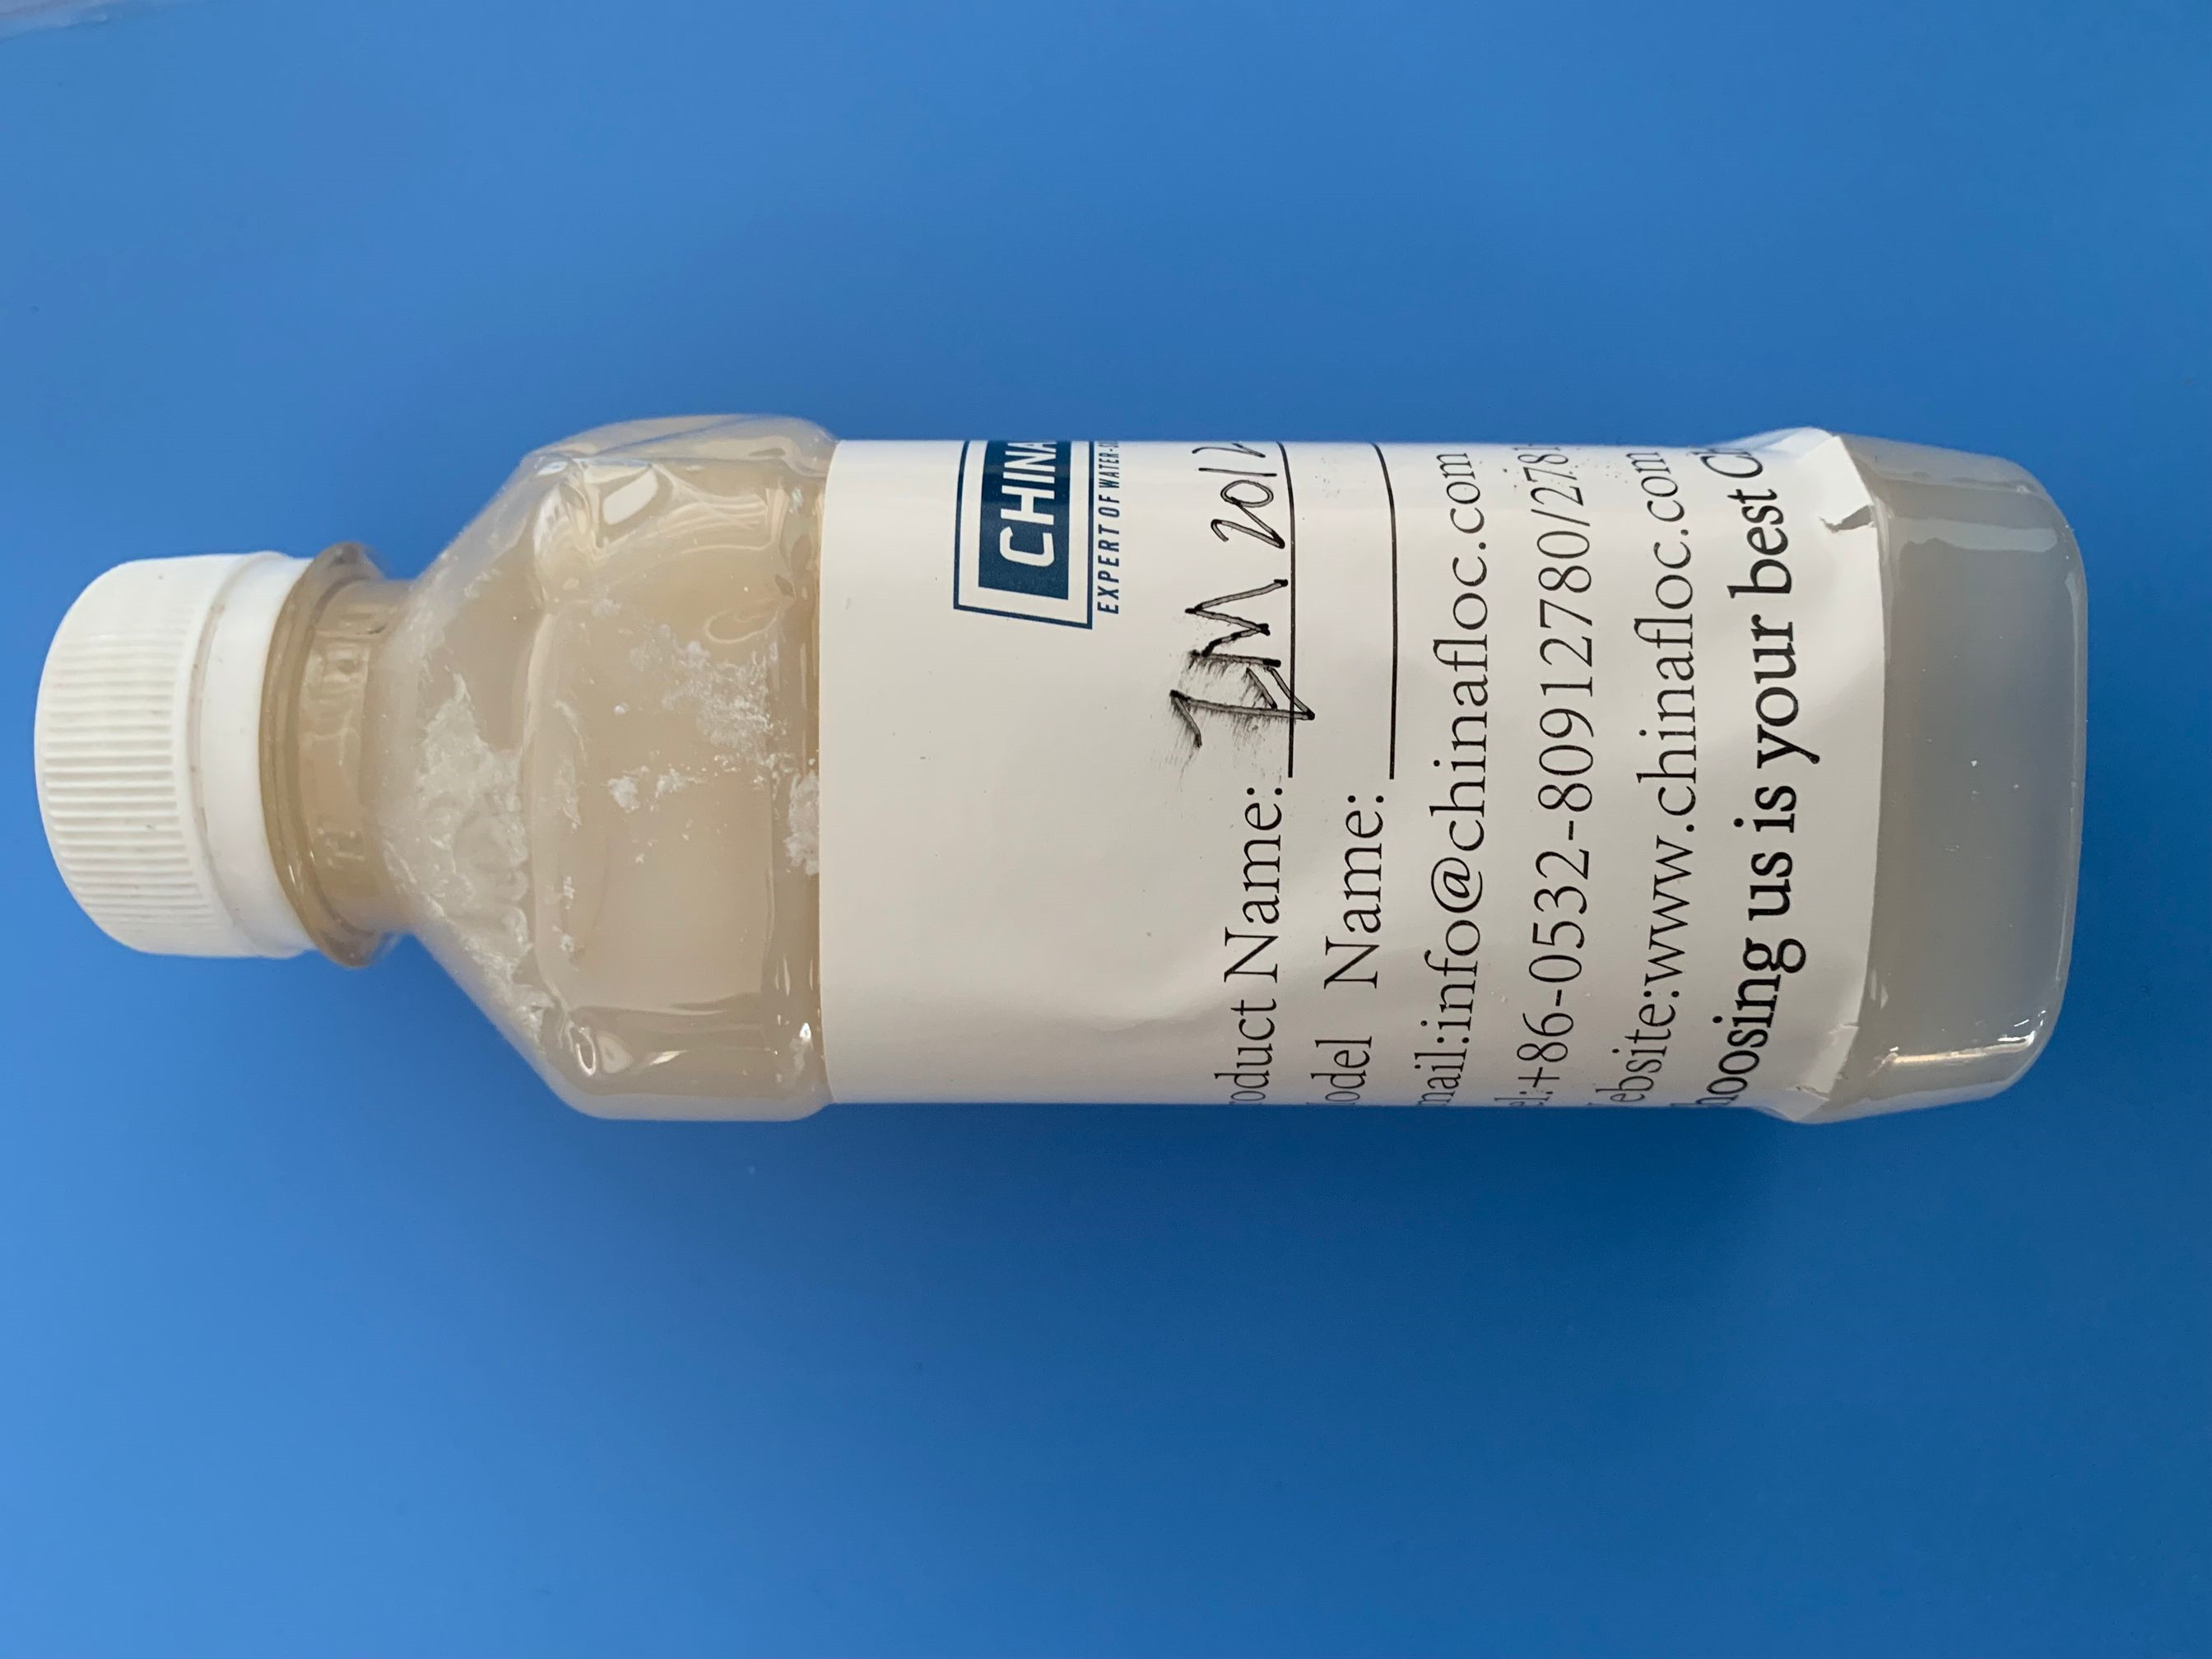 Emulsion cationic flocculant of FLOPAM EM540,640,840,445 can be replaced by  Chinafloc EM series, China Emulsion cationic flocculant of FLOPAM  EM540,640,840,445 can be replaced by Chinafloc EM series manufacturer and  supplier - CHINAFLOC